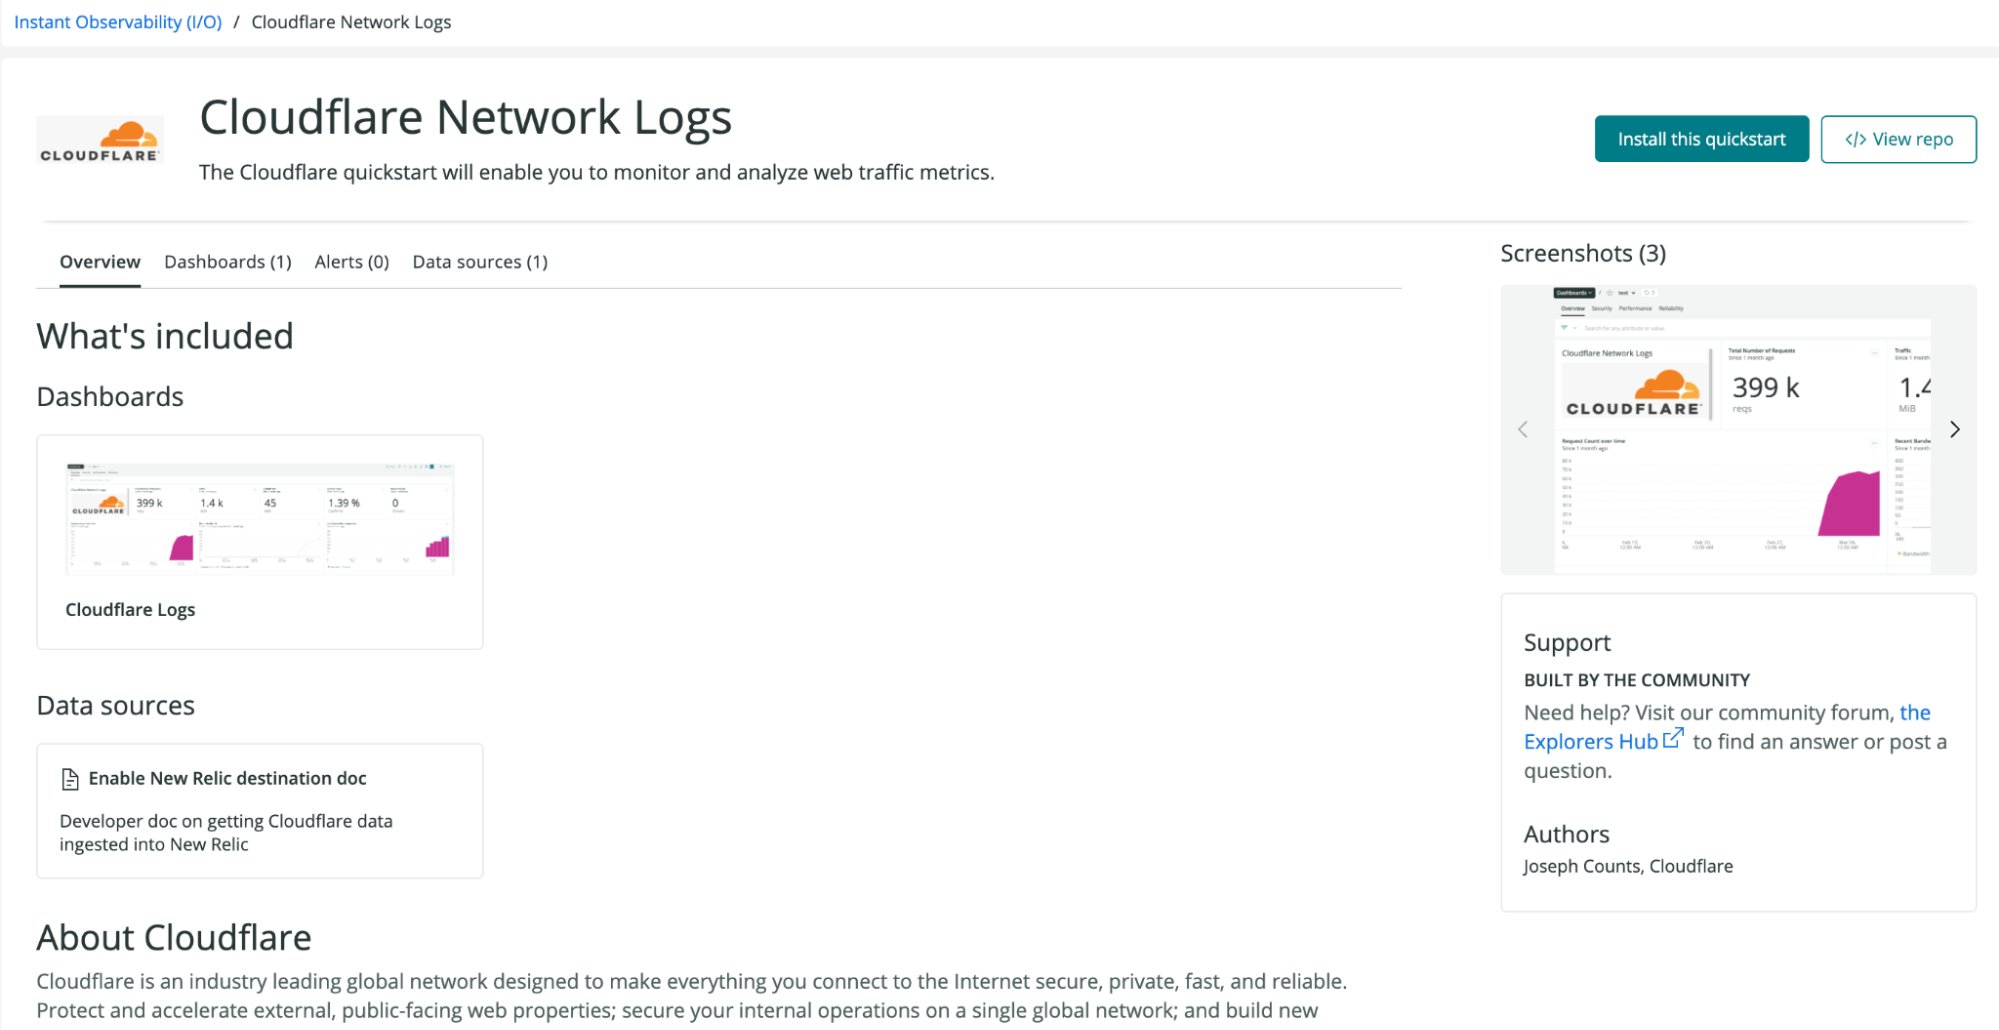 Cloudflare Network Logs install screen